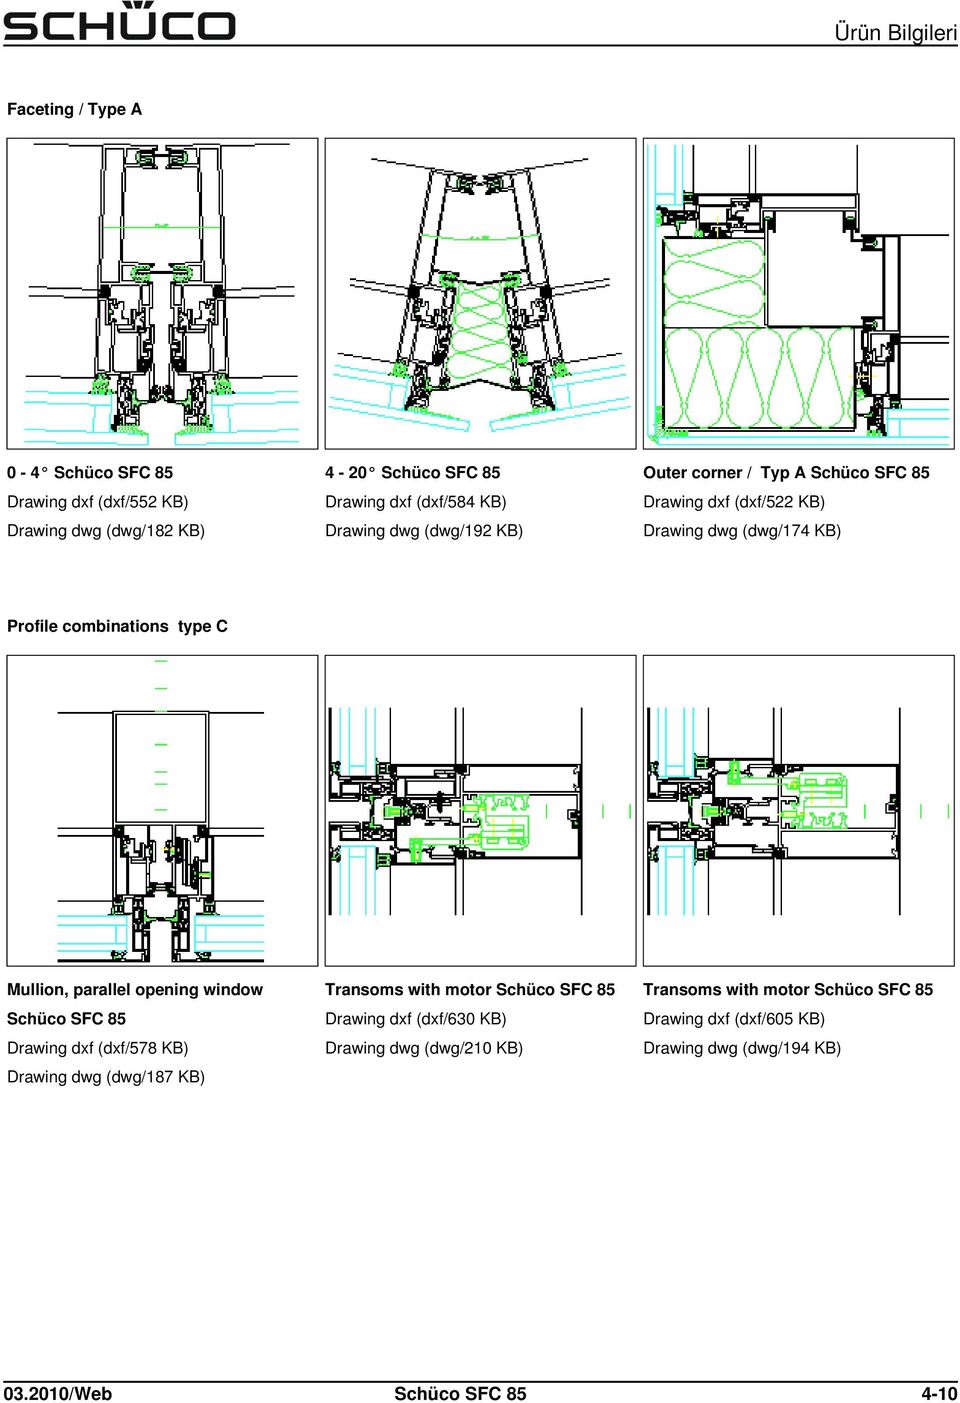 Mullion, parallel opening window Drawing dxf (dxf/578 KB) Drawing dwg (dwg/187 KB) Transoms with motor Drawing dxf